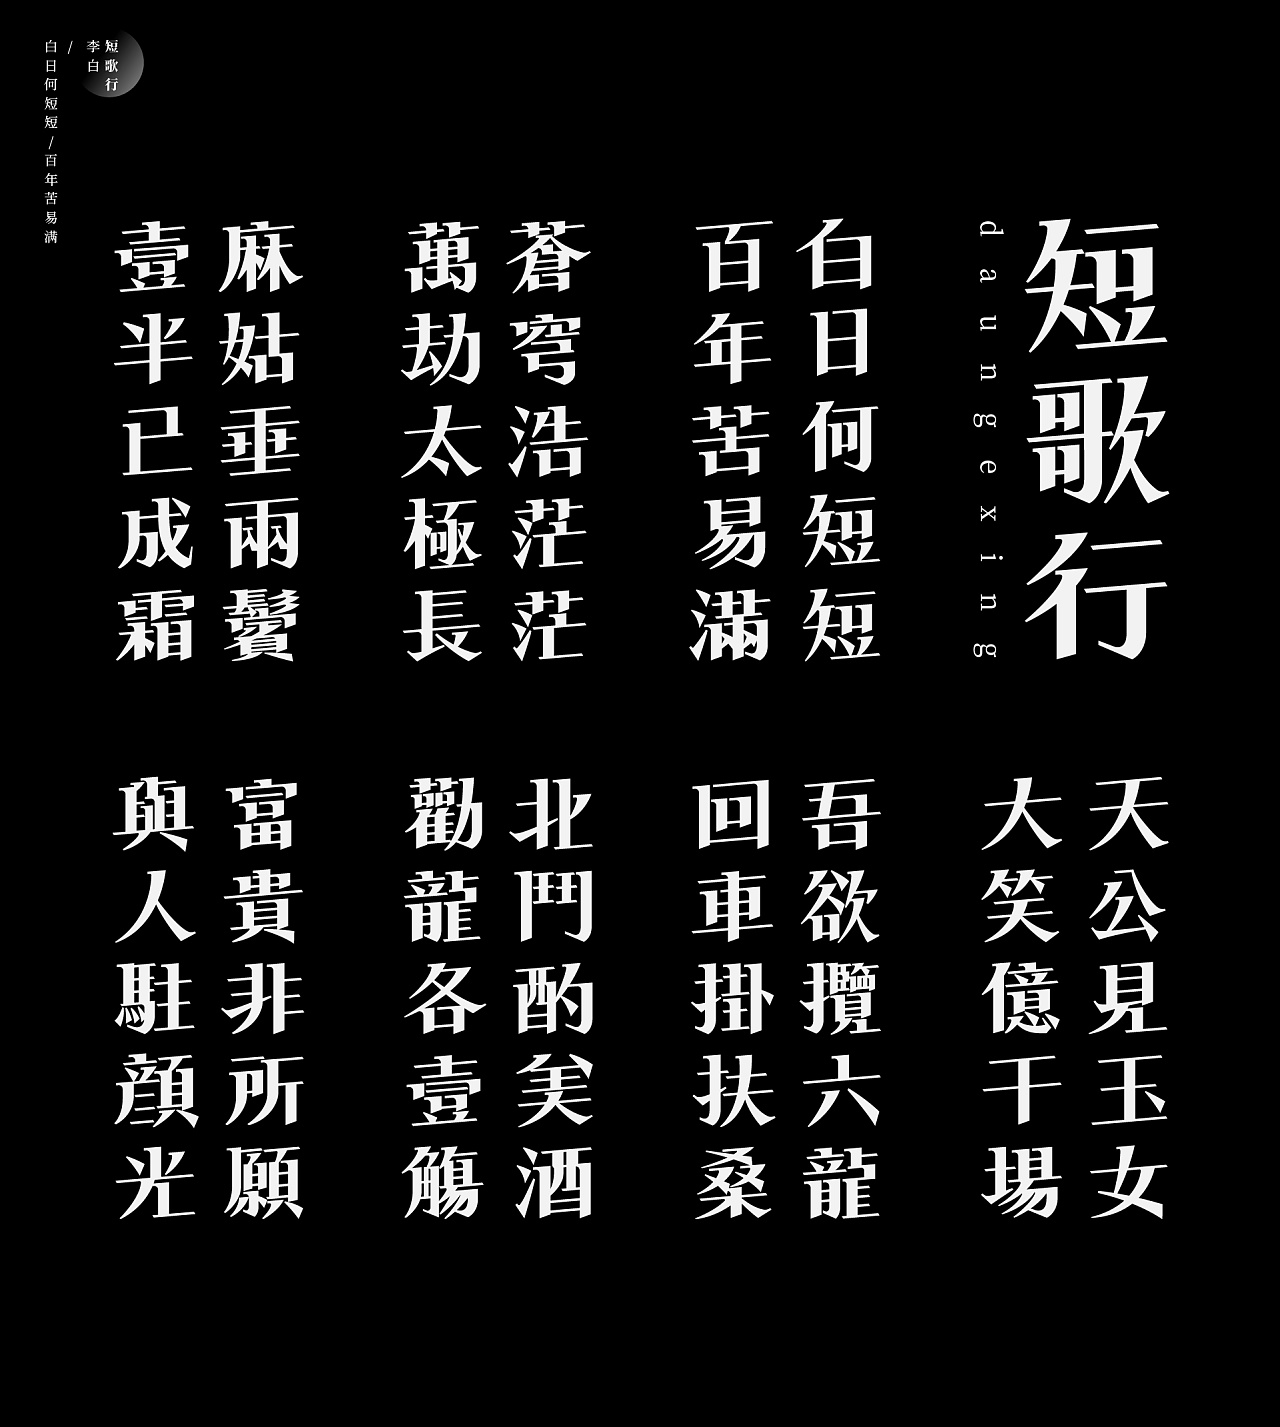 Chinese Creative Font Design-Font Design of Ancient Poems-Short Songs